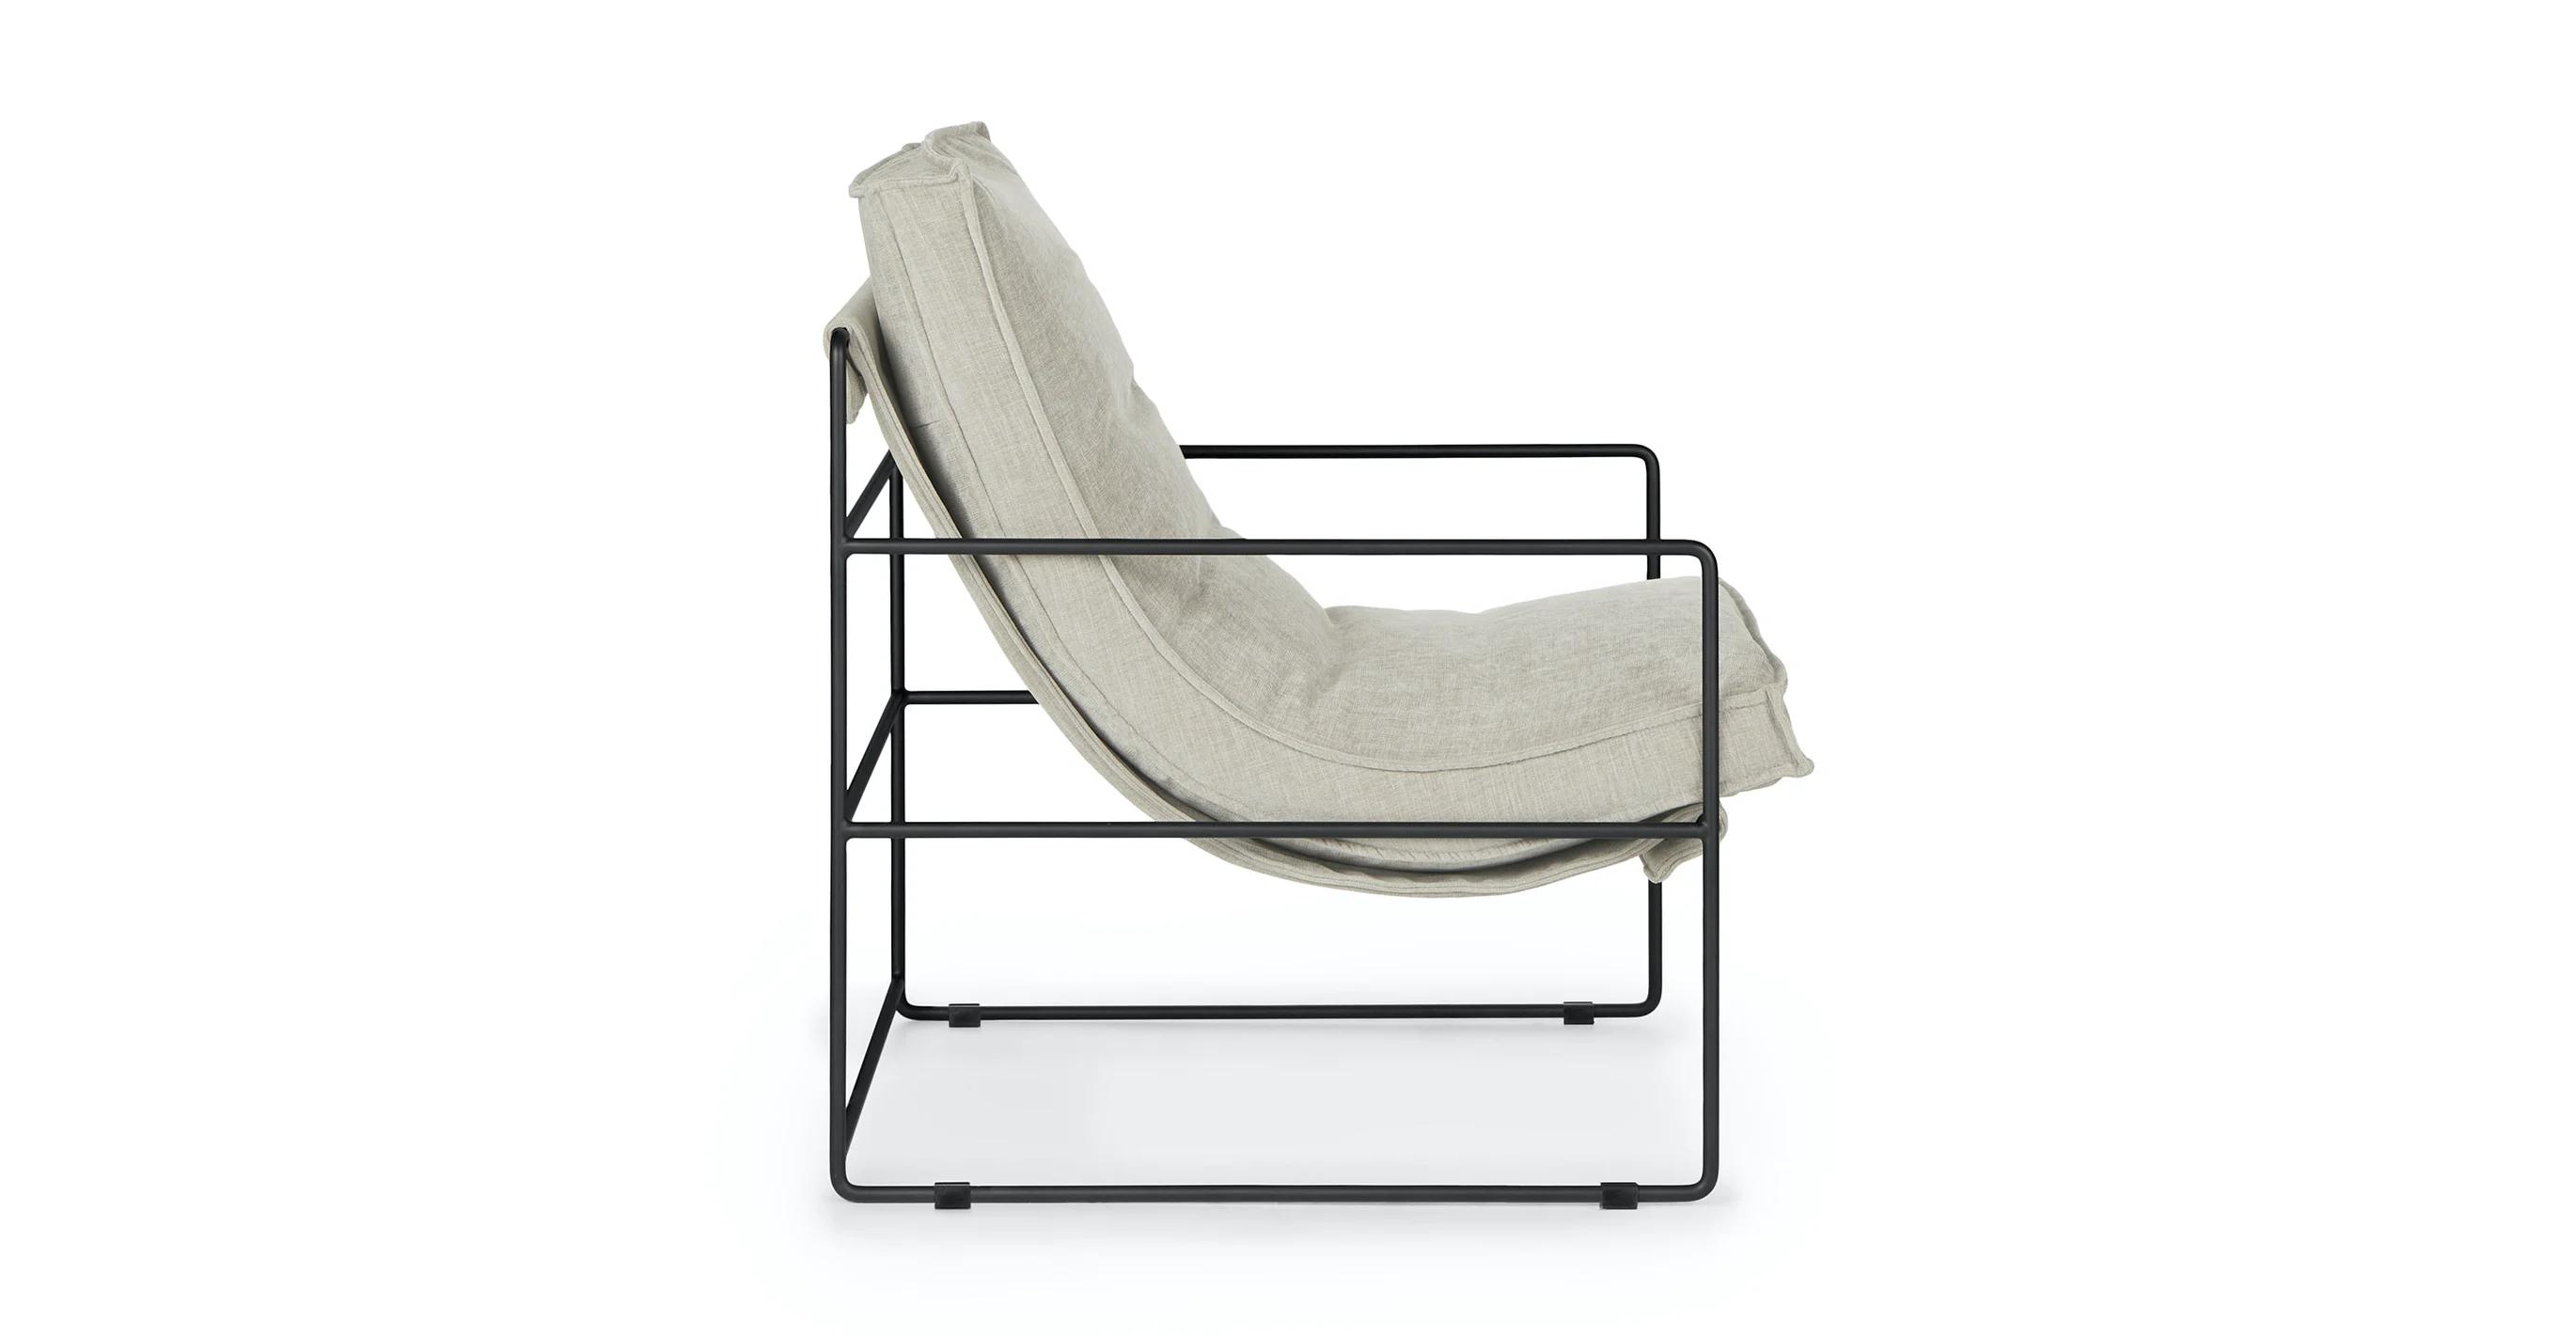 Entin Whistle Gray Lounge Chair - Image 2